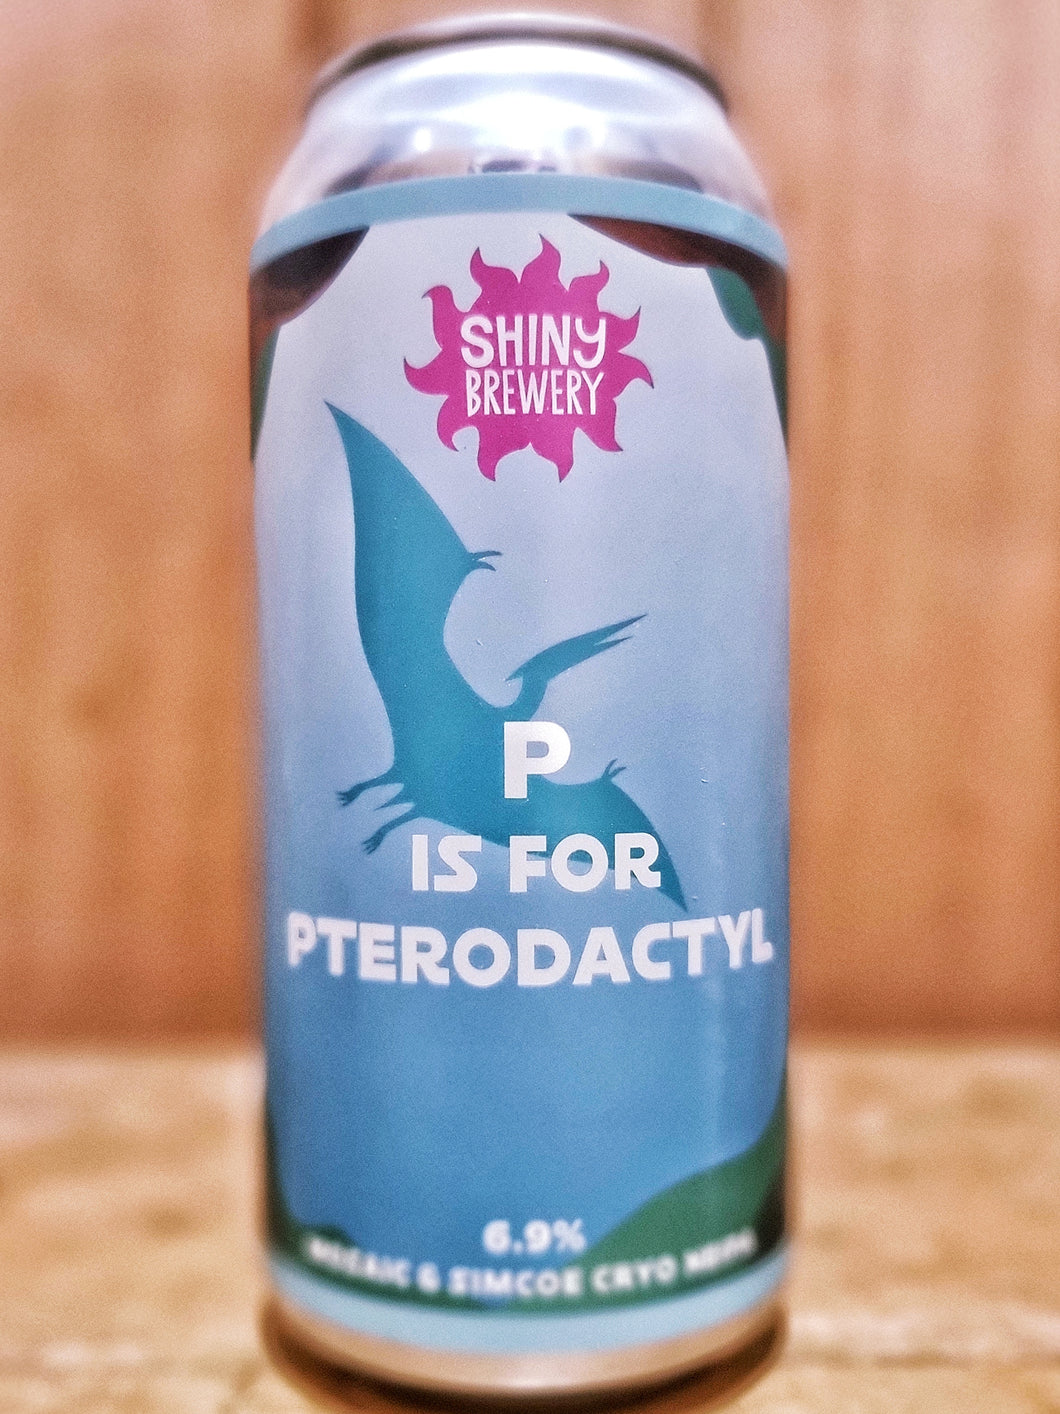 Shiny Brewery - P Is For Pterodactyl